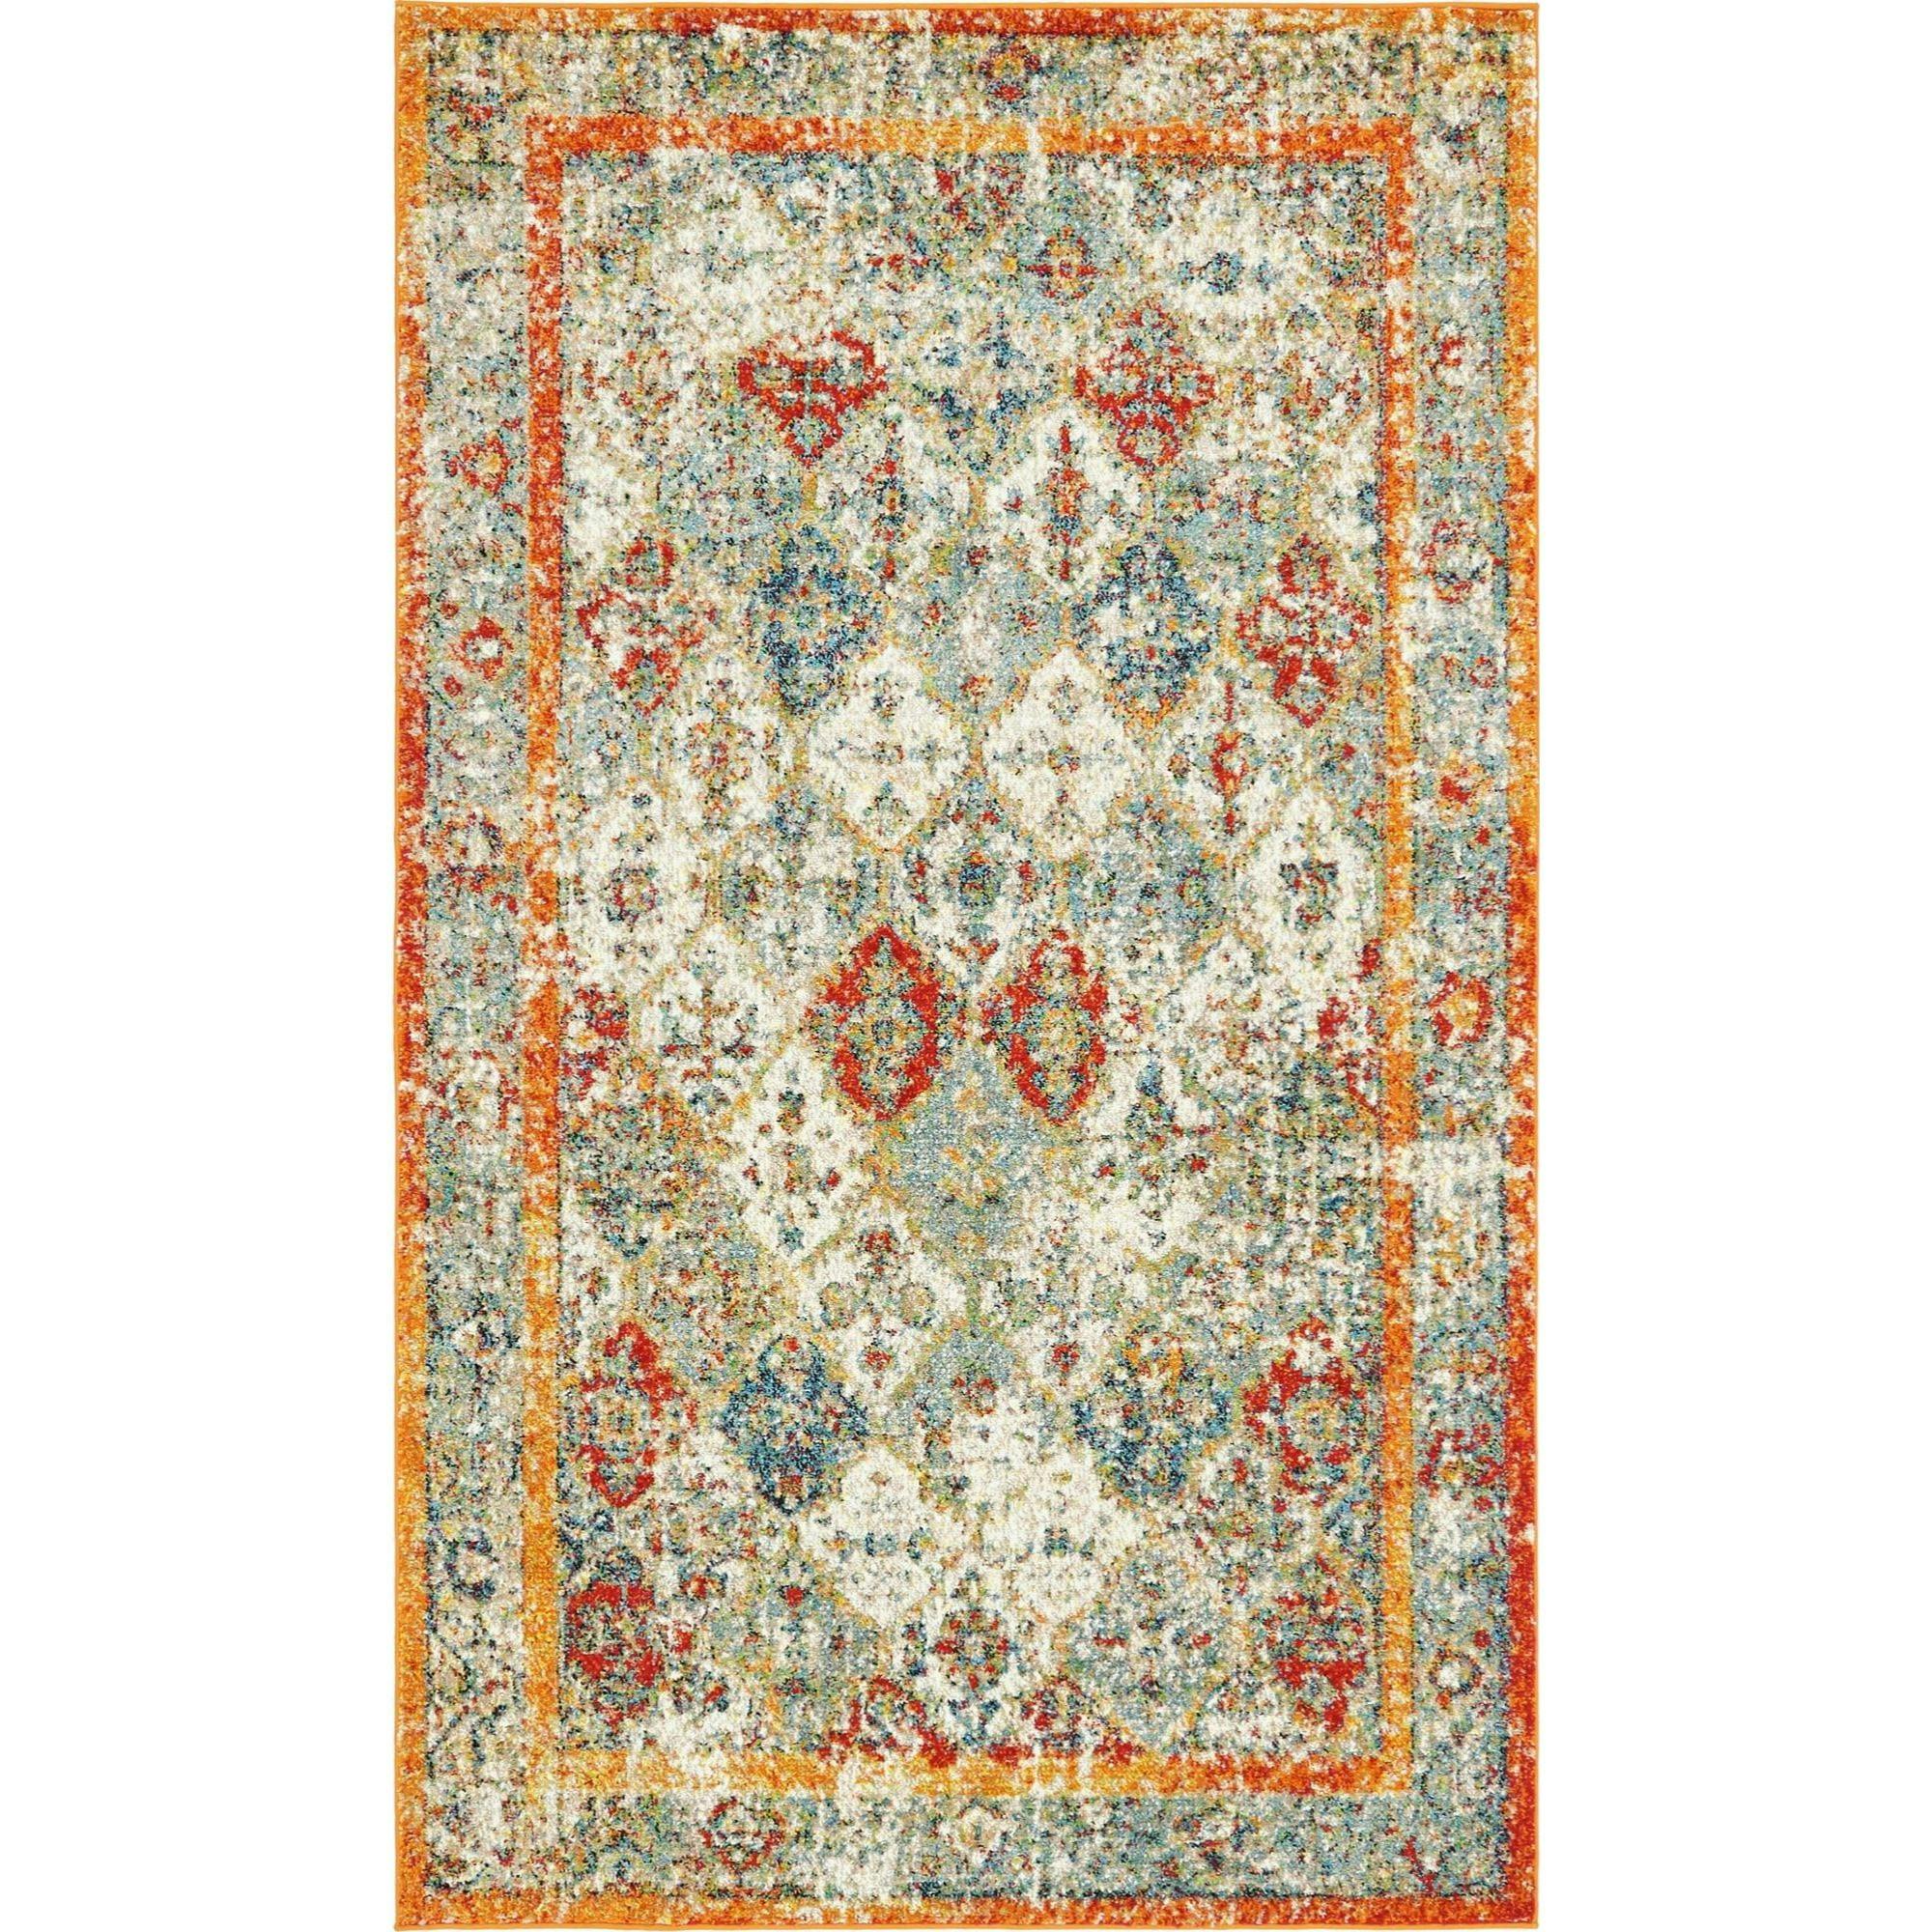 Venice Collection 5' x 8' Rectangular Indoor Rug in Warm Tones and Blue Accents